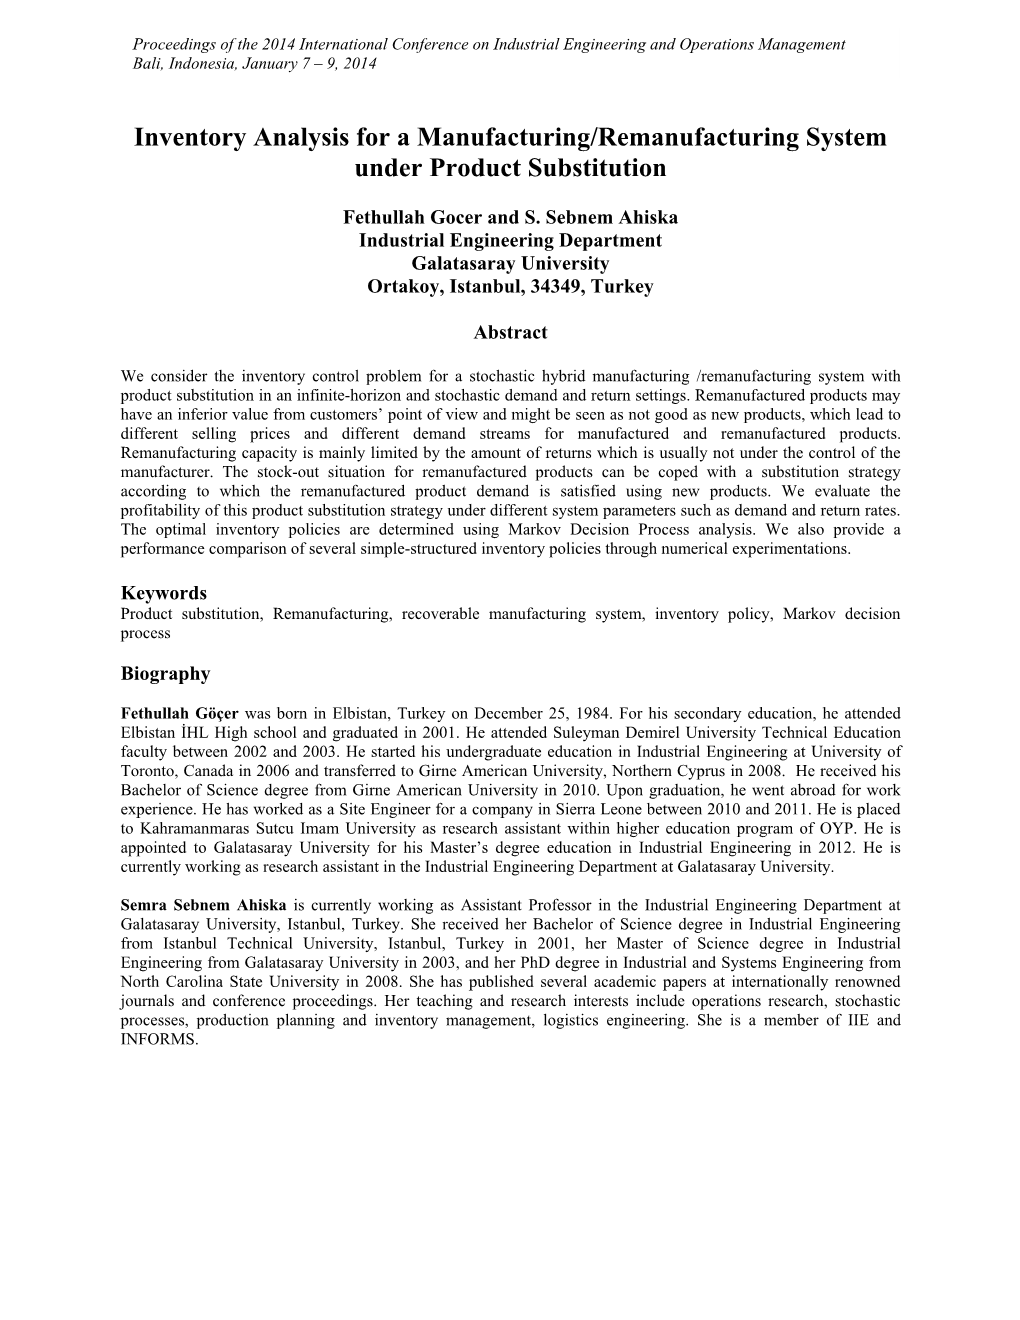 Inventory Analysis for a Manufacturing/Remanufacturing System Under Product Substitution